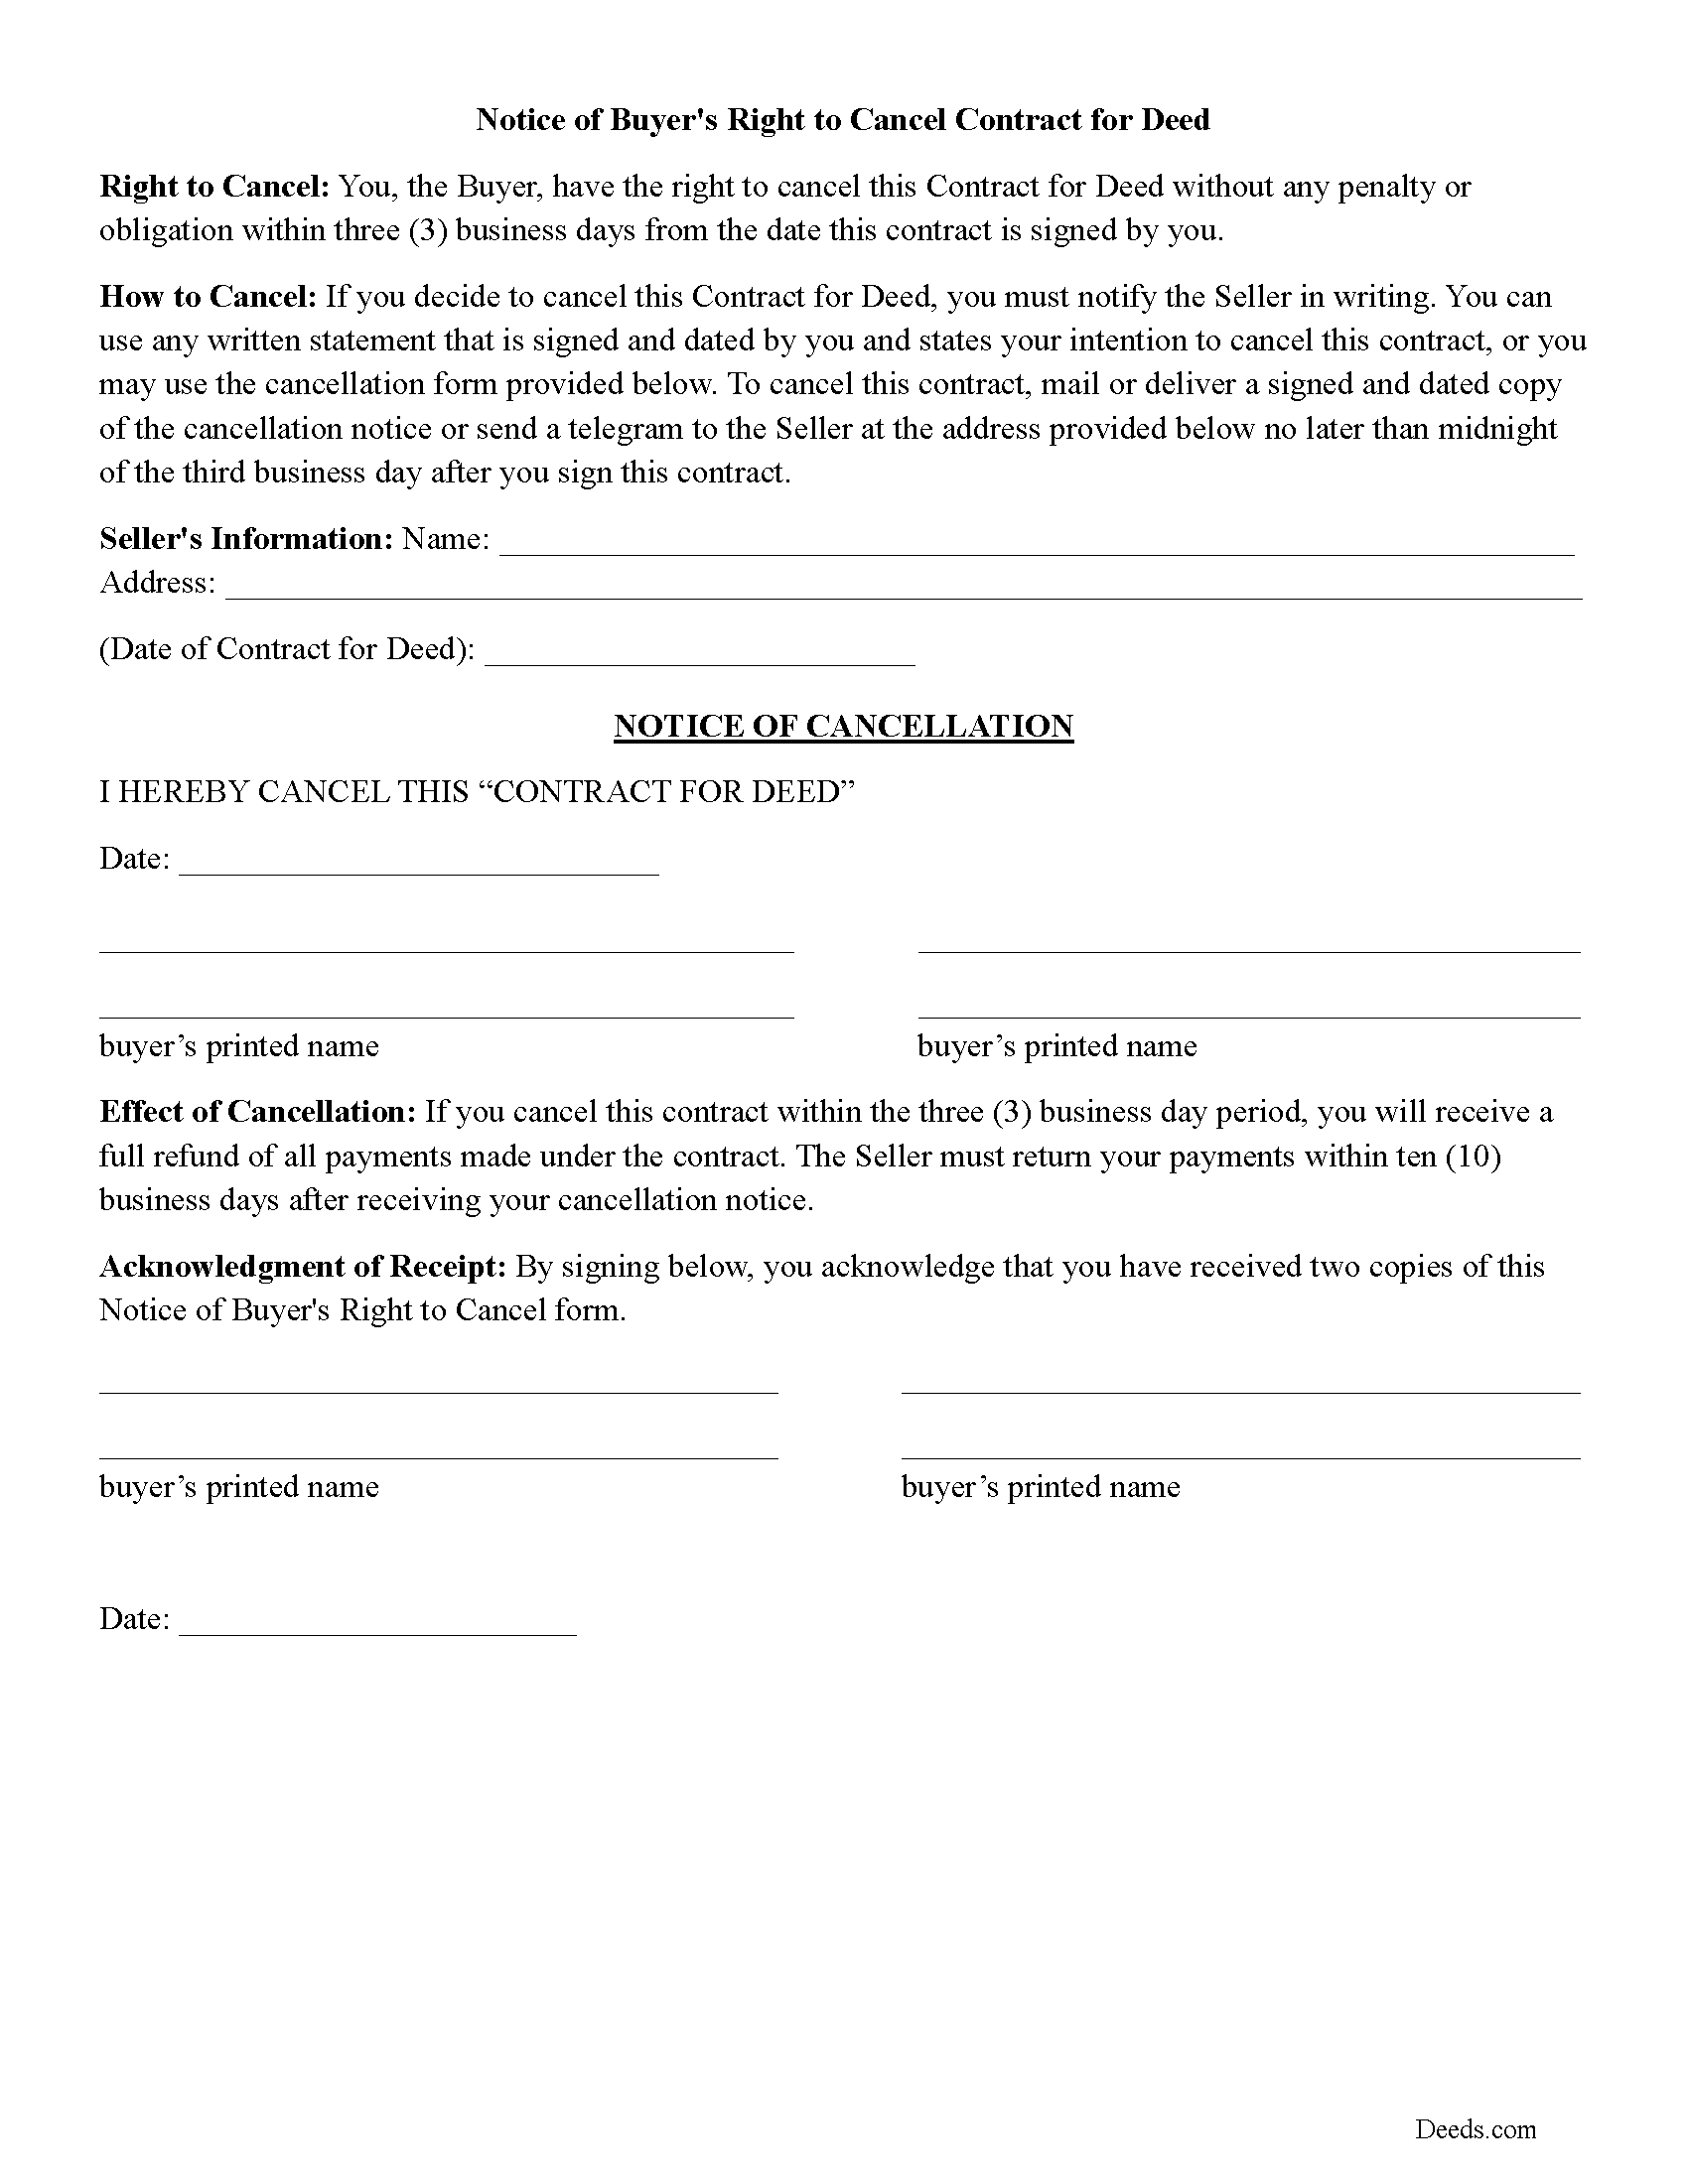 Clark County 3-day Cancellation Notice Form